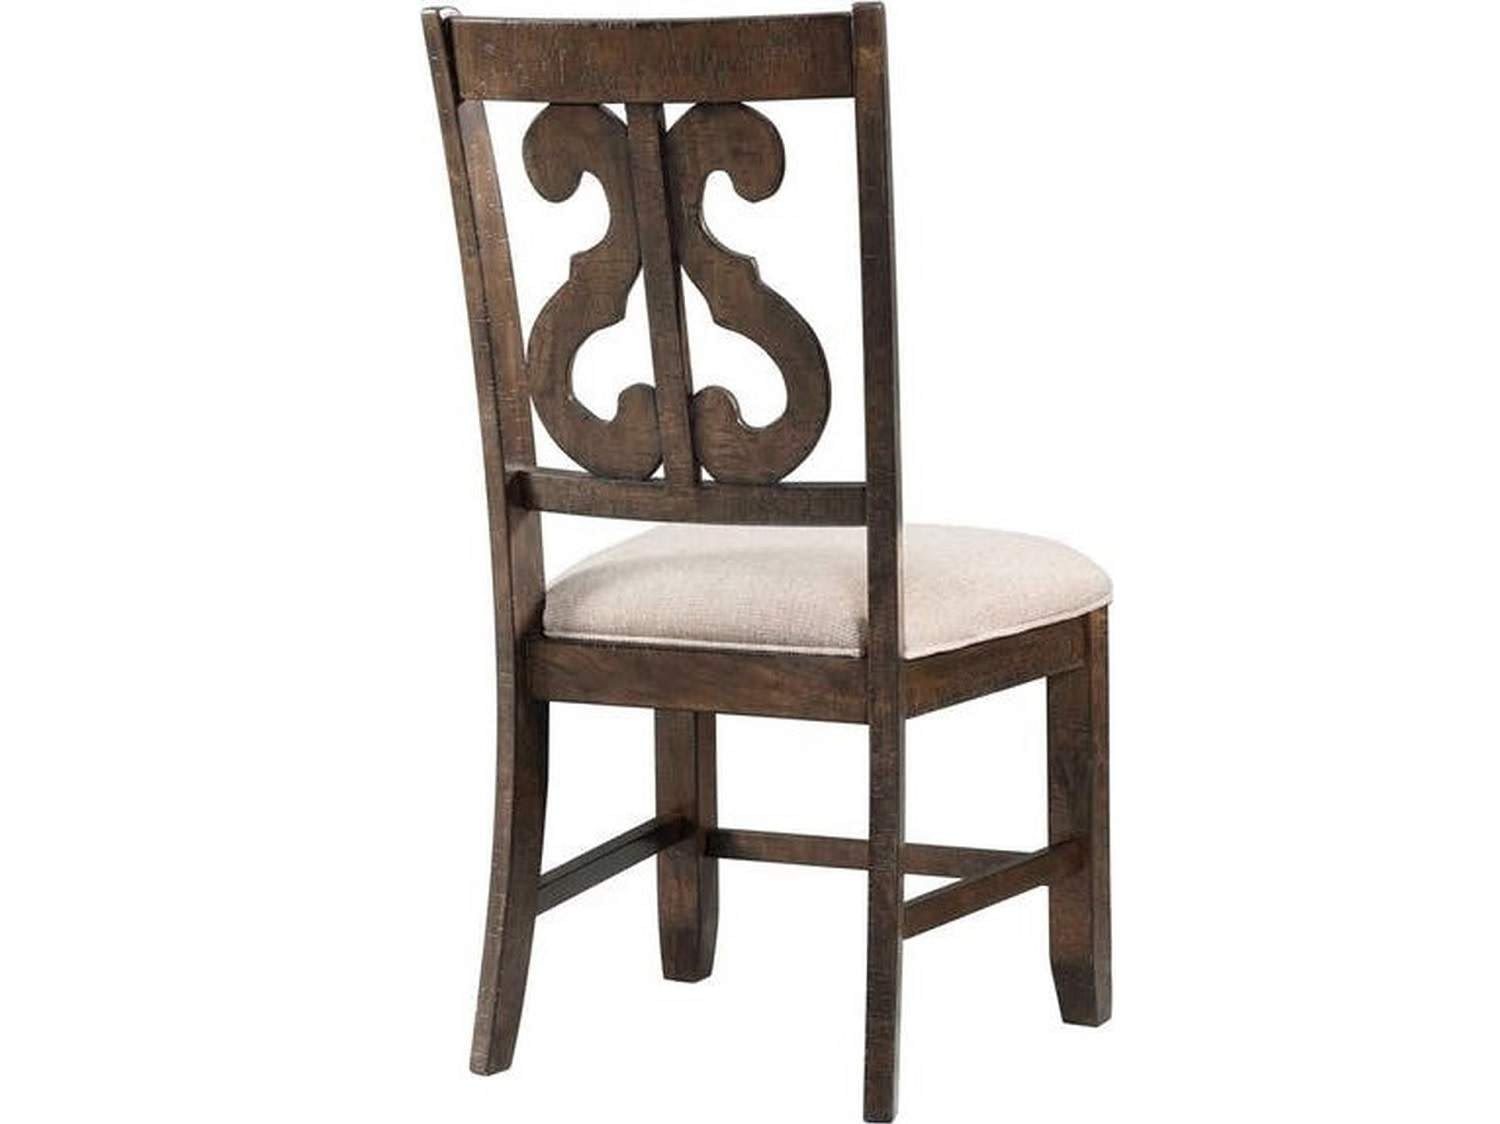 BRIER Dining Chair - Back